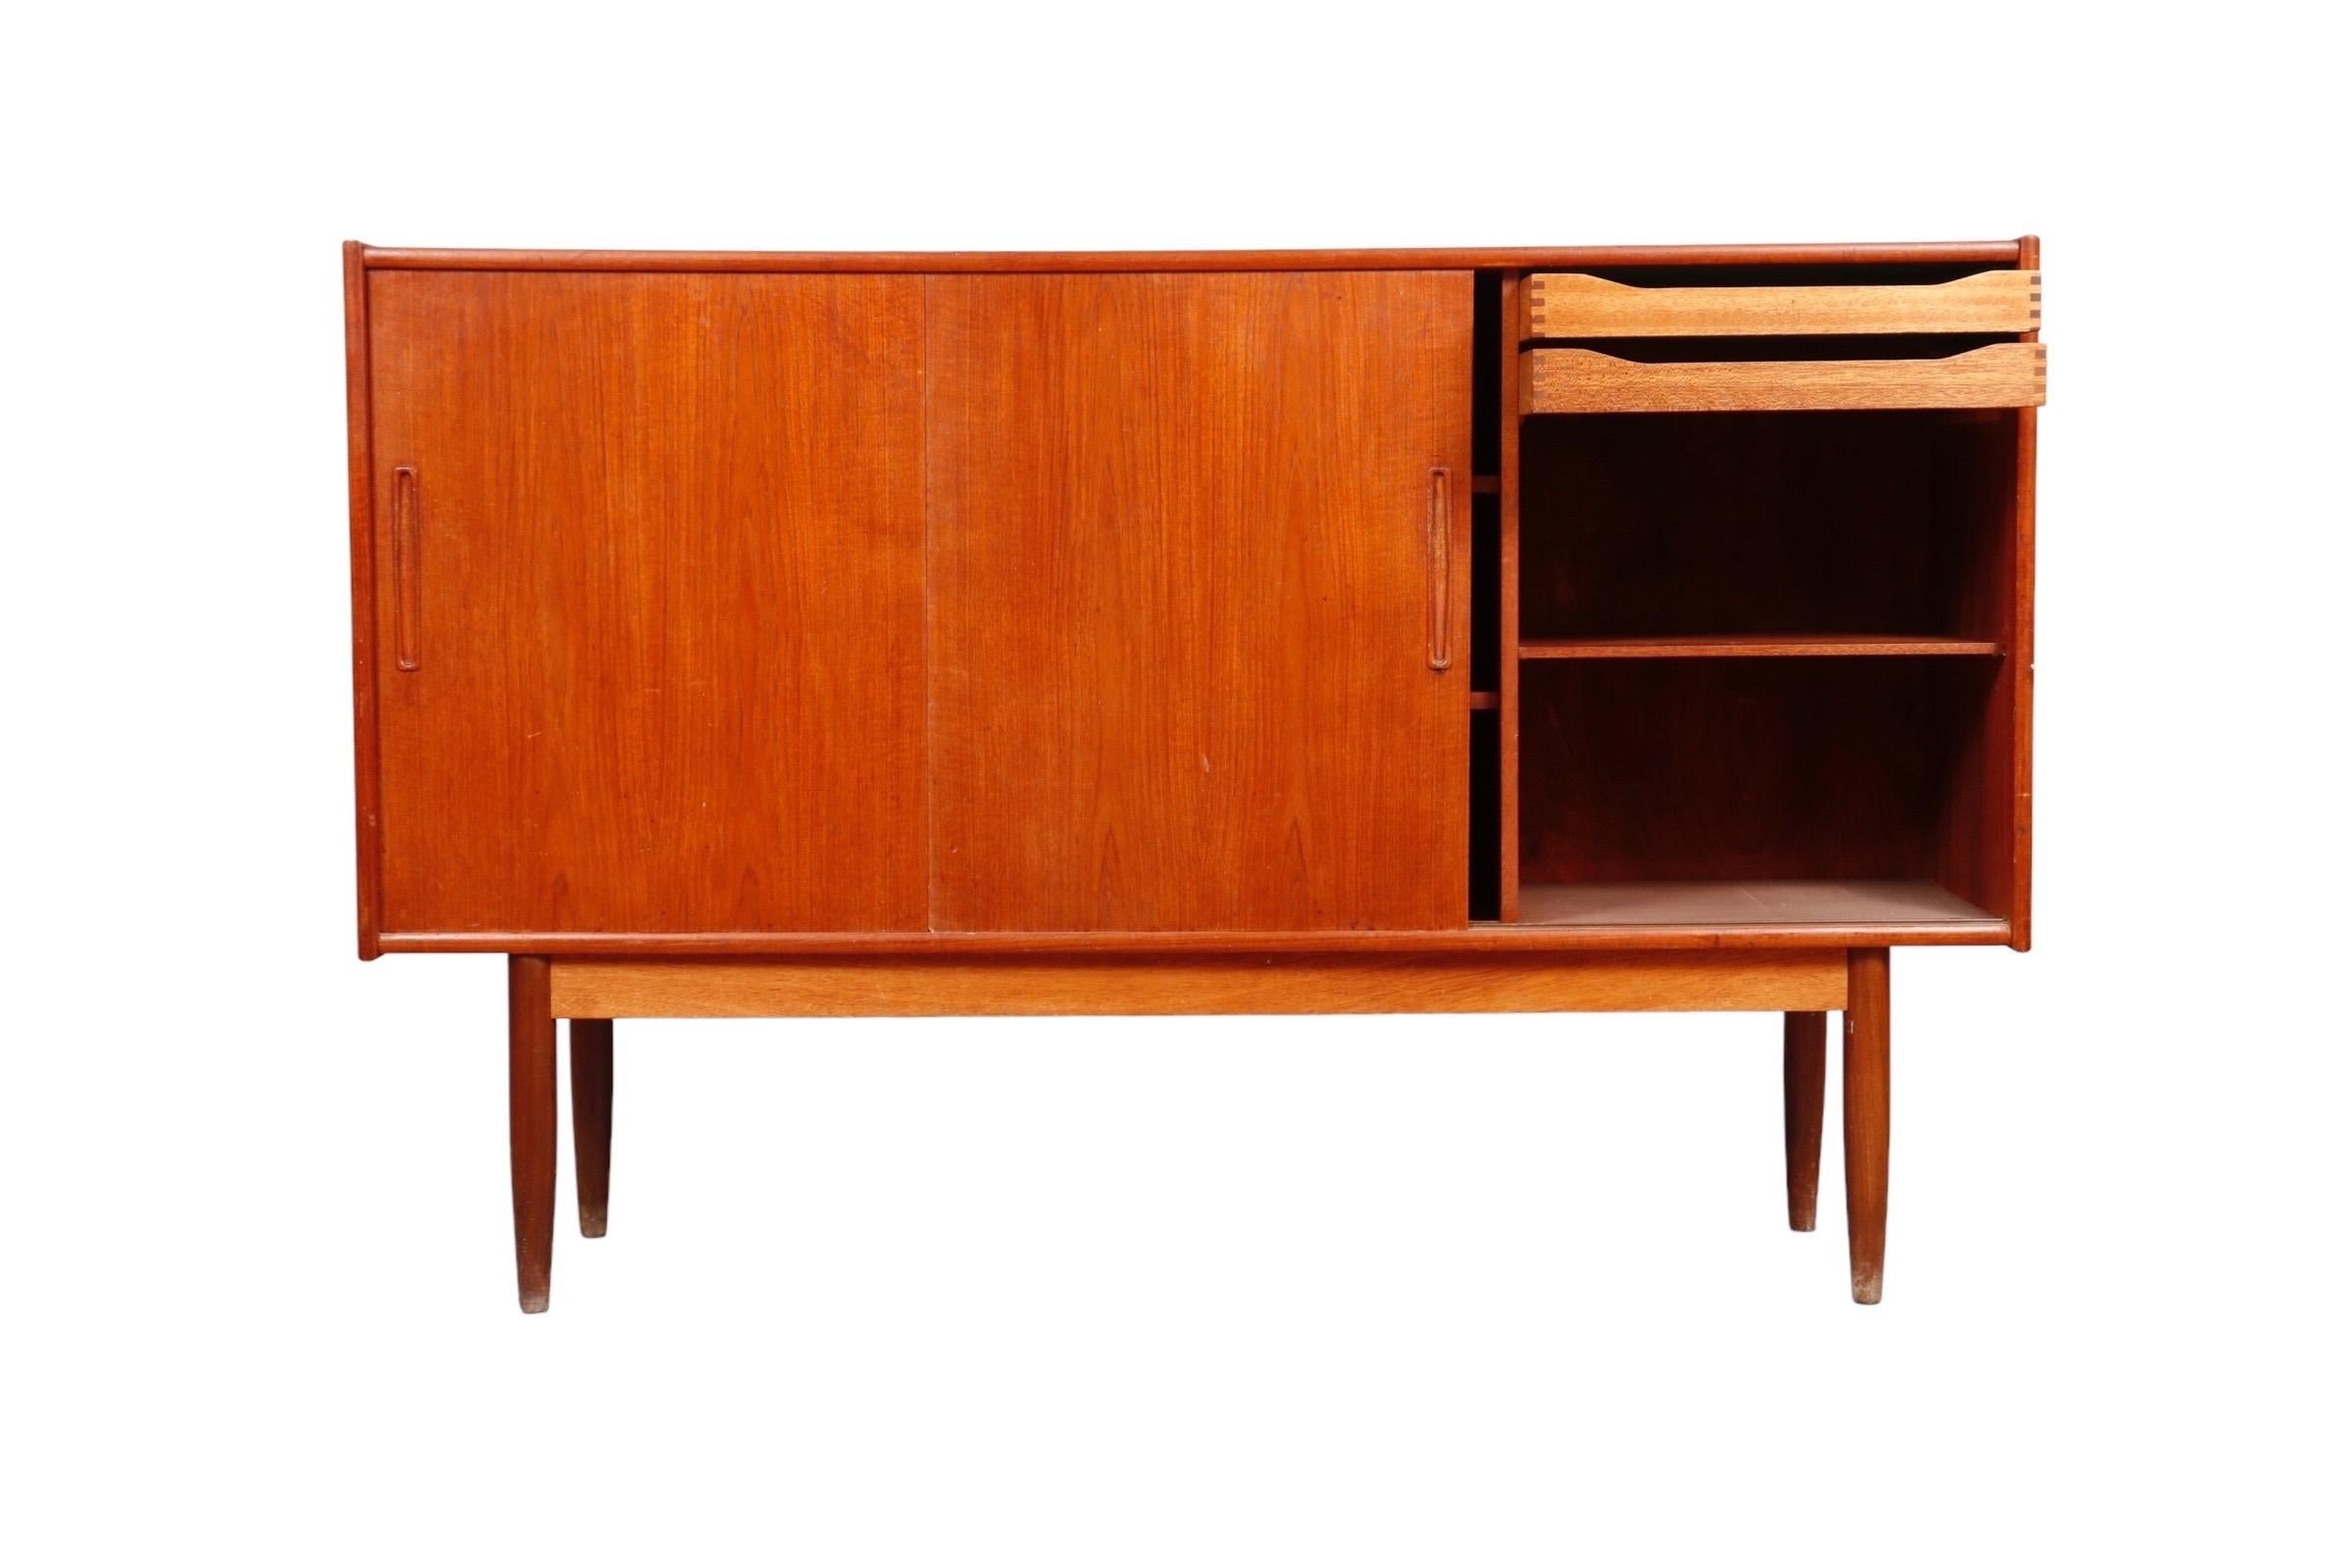 A Danish mid-century sideboard made of teak. Three cabinet doors slide with recessed handles to reveal adjustable shelves on the left and center. To the right are two felt lined dovetailed drawers. Round tapered legs are supported with a straight